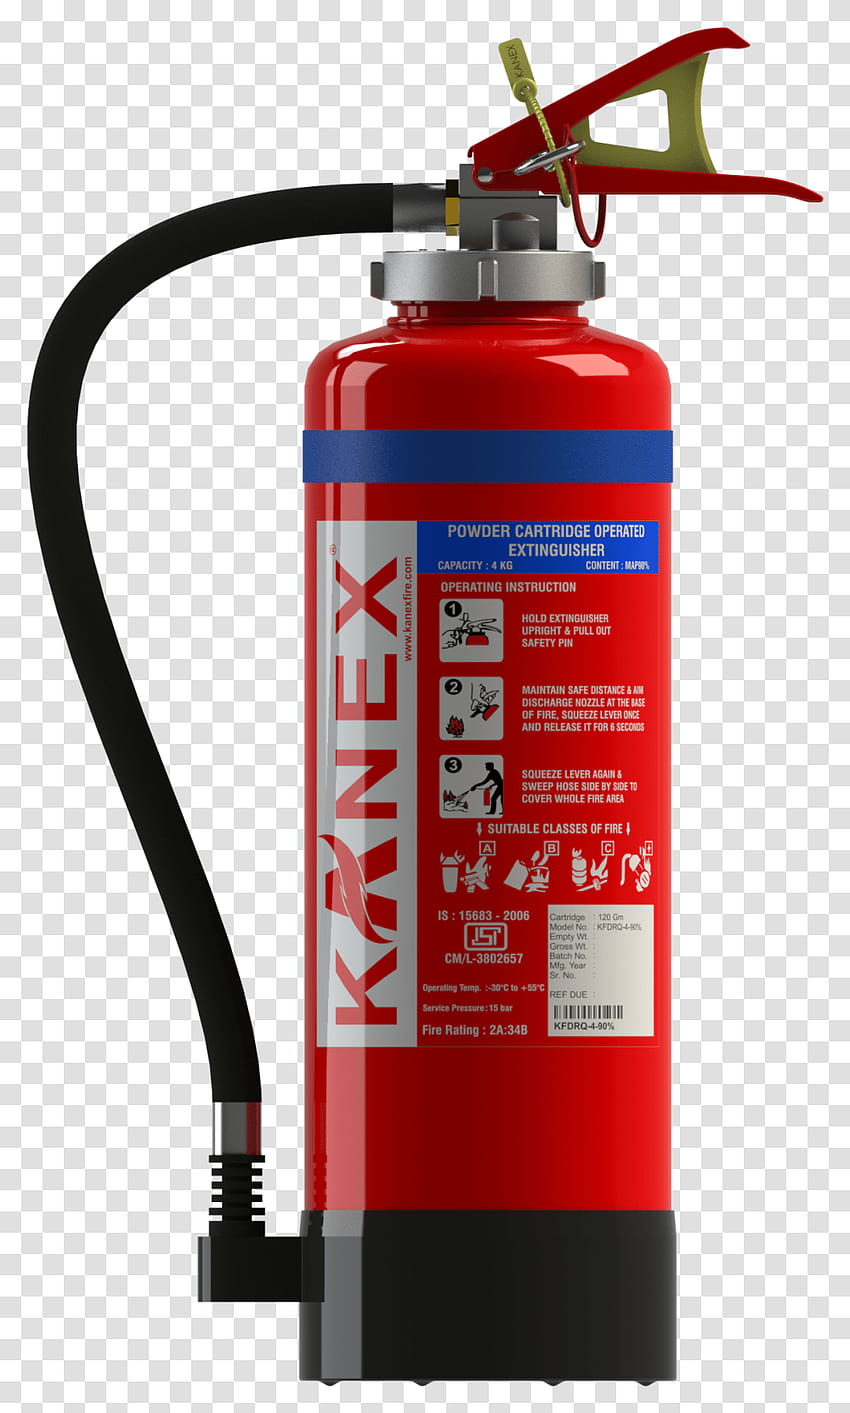 Fire Fire Extinguisher No Background, Bottle, Gas Pump, Machine, Spray Can Transparent Png – Pngset HD phone wallpaper